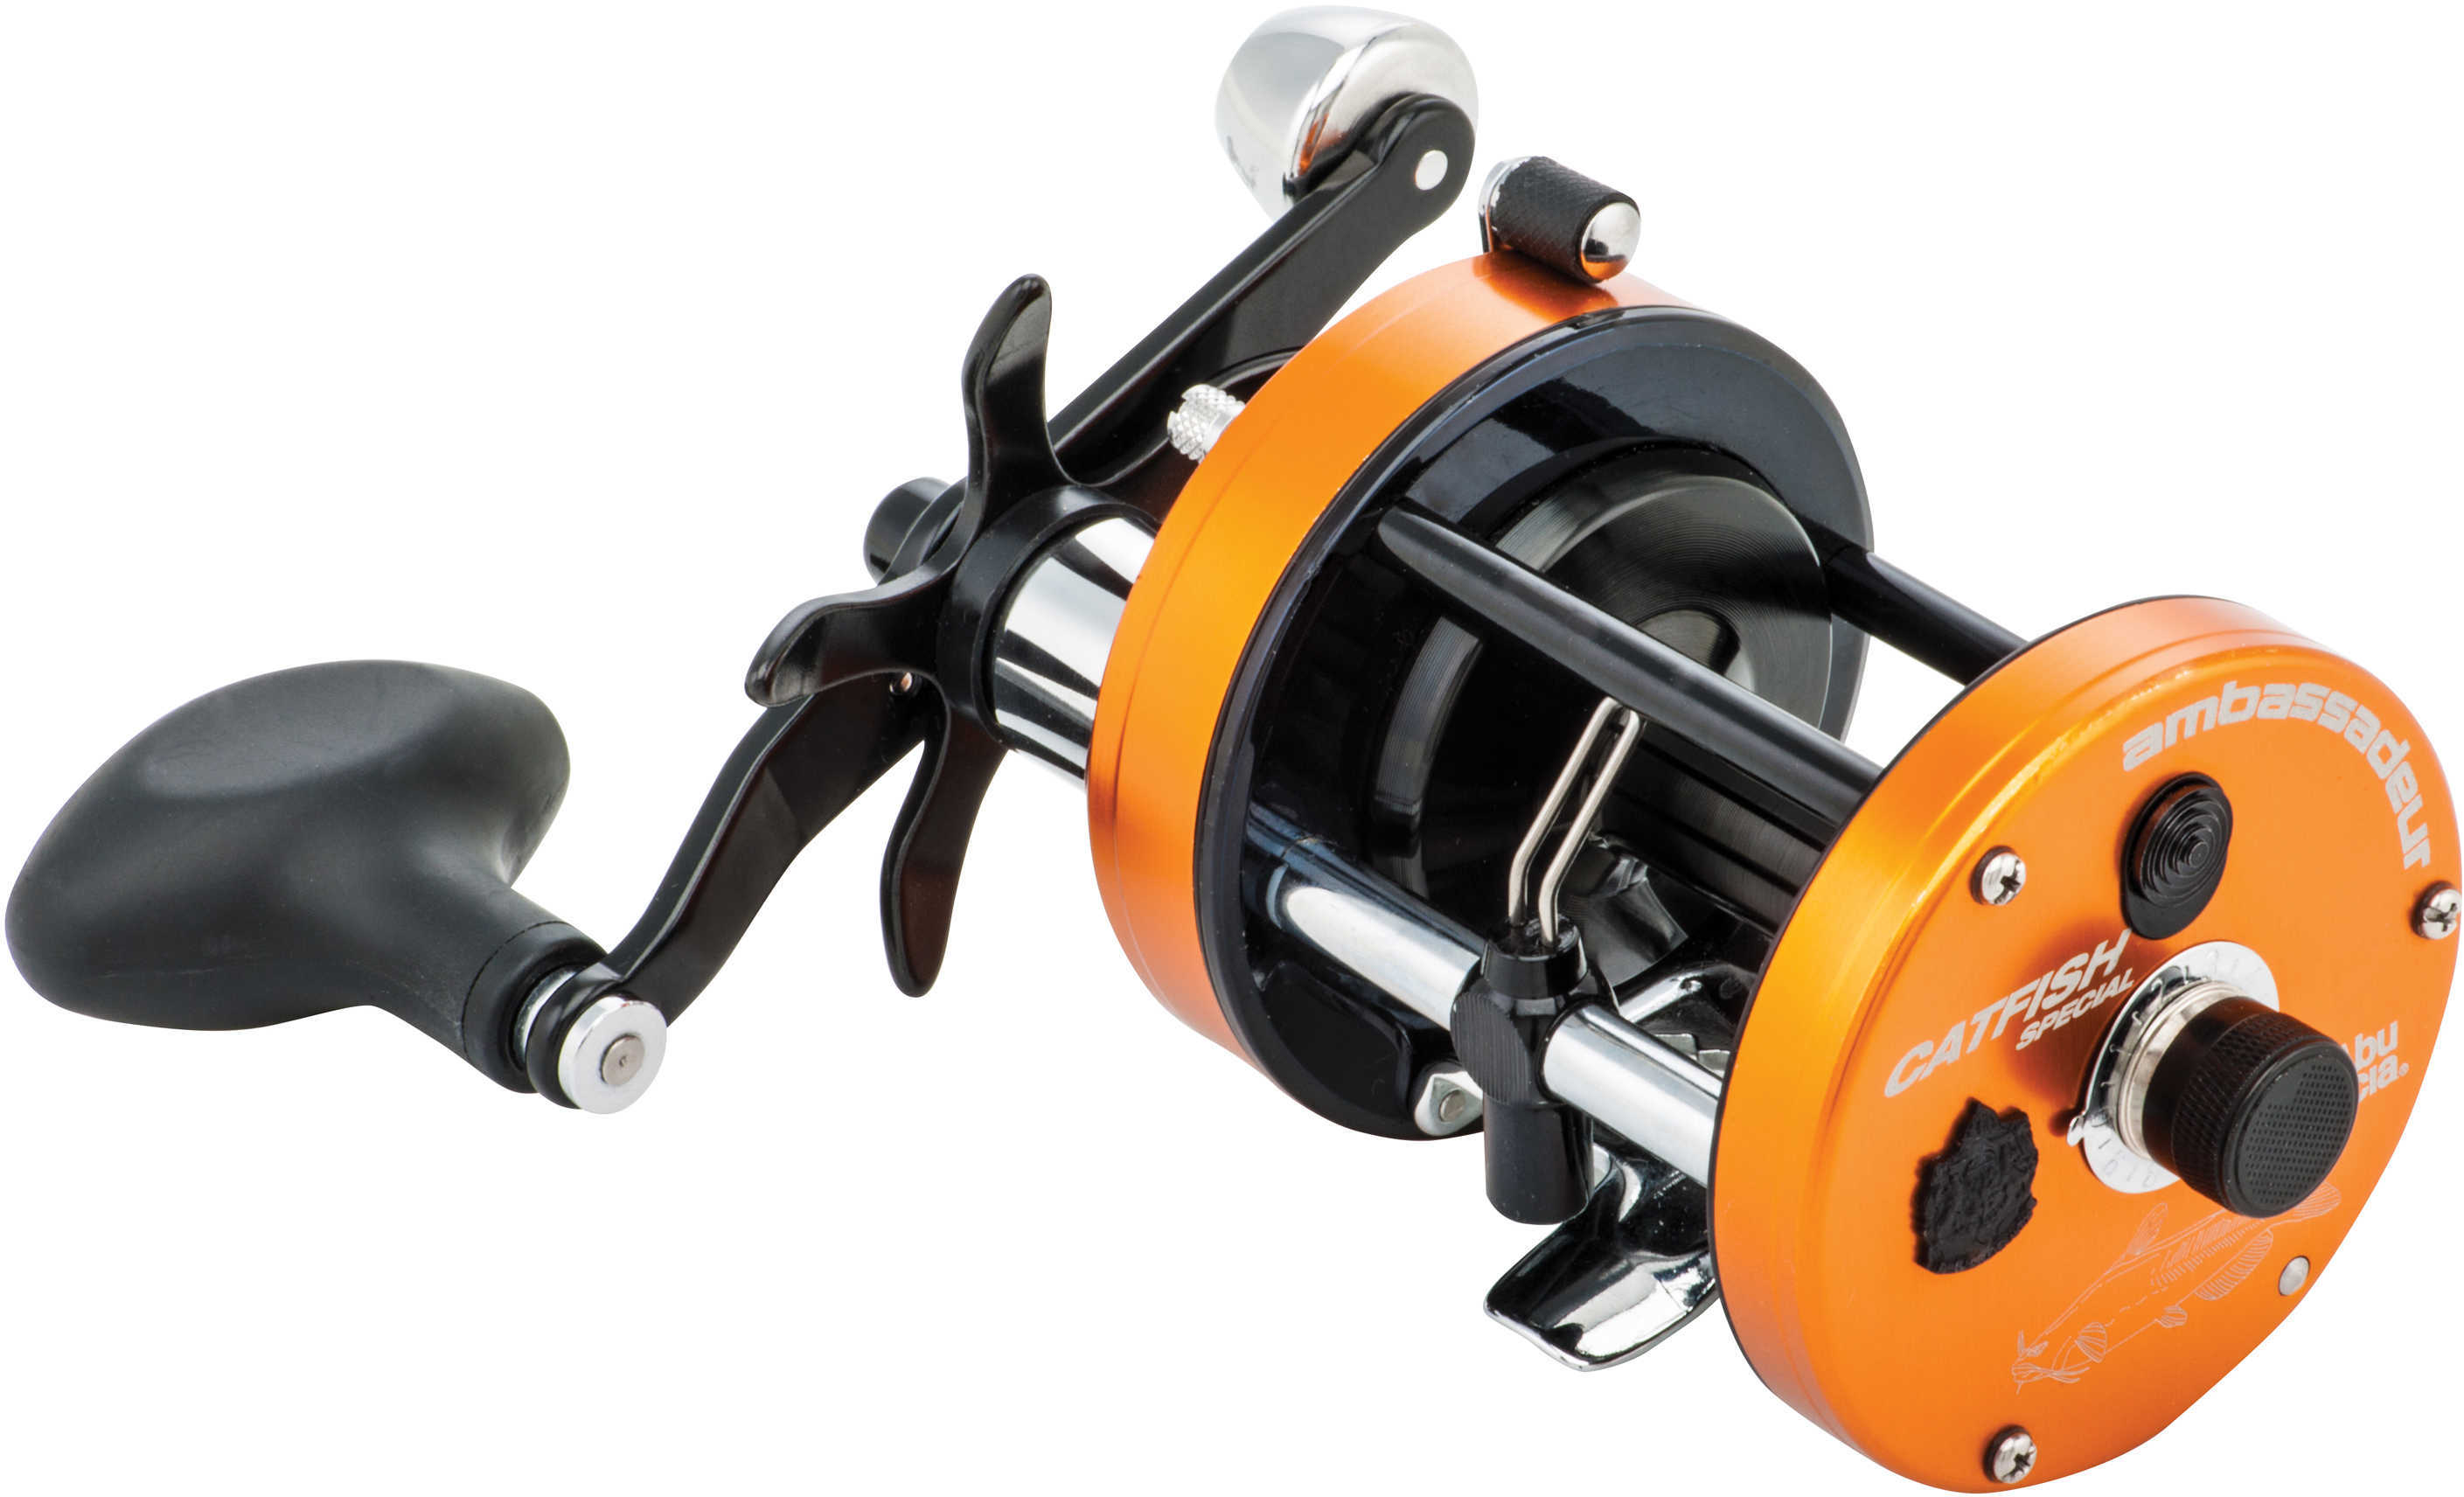 Abu Garcia C3 Catfish Special Round Reel 6500, 5.3:1 Gear Ratio, 4 Bearings, 15 lb Max Drag, Right Hand Md: 136